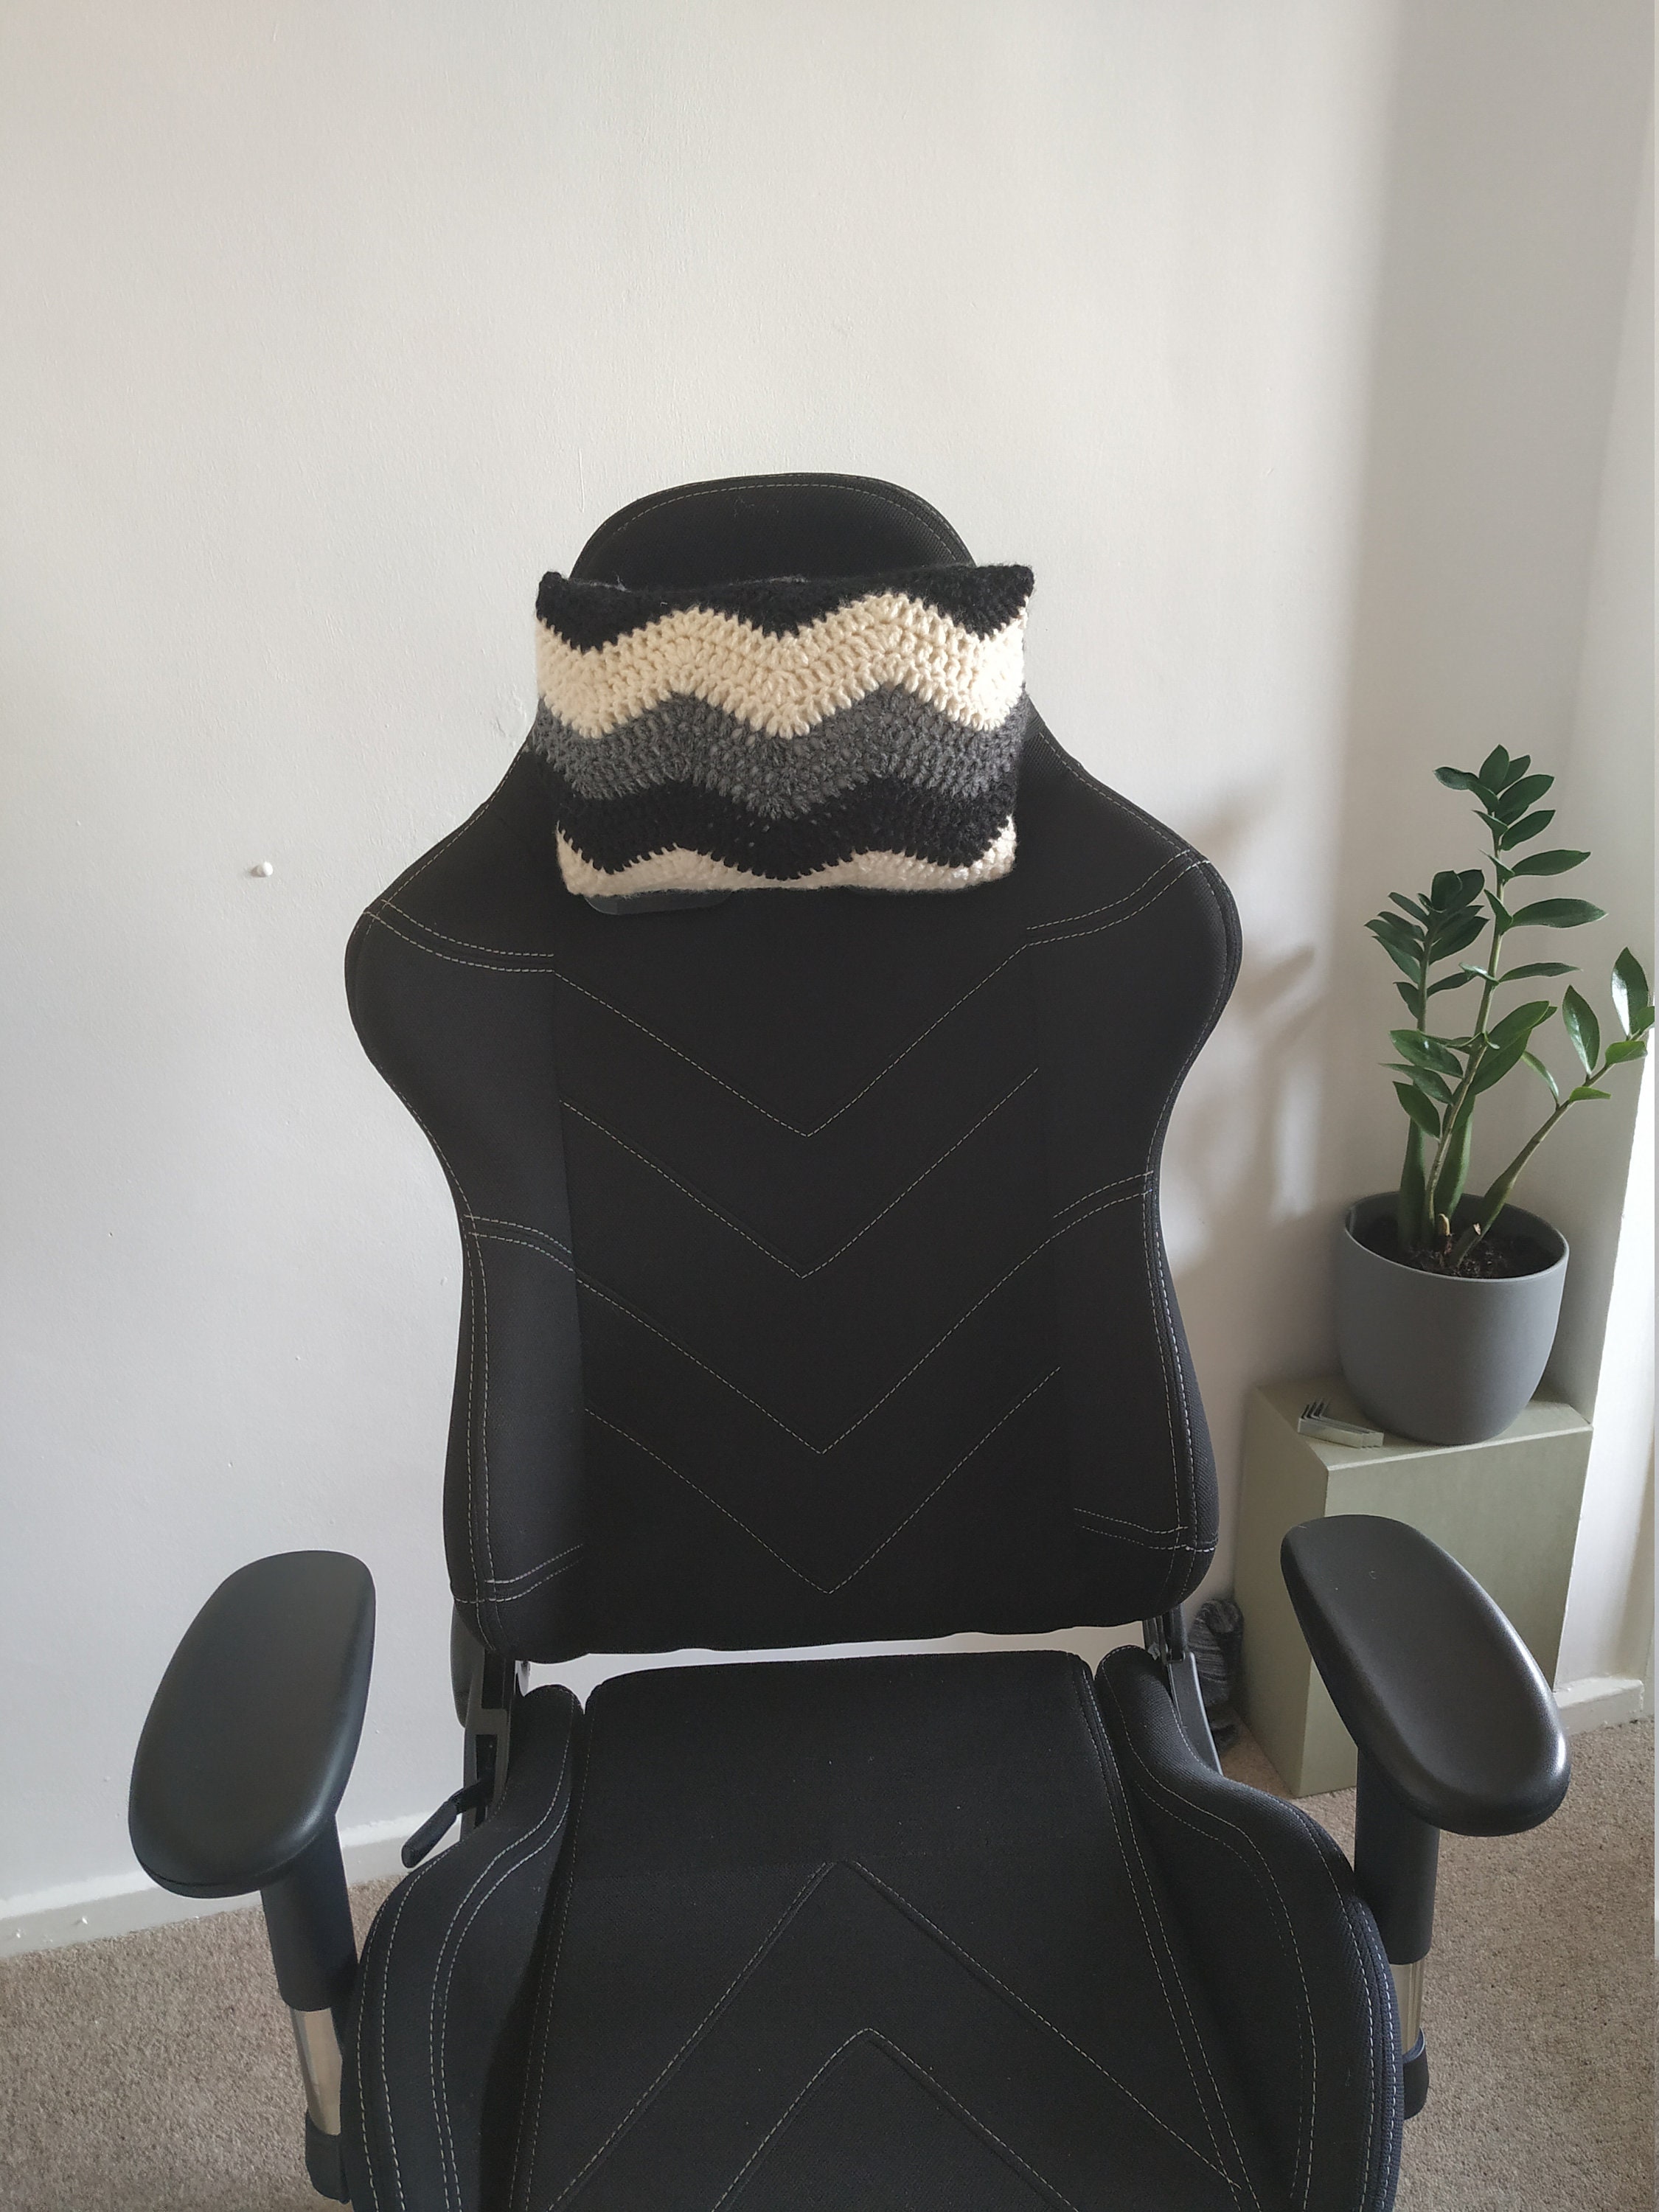 Gaming Chair Neck Support Cushion, Neck Rest Cushion for Office